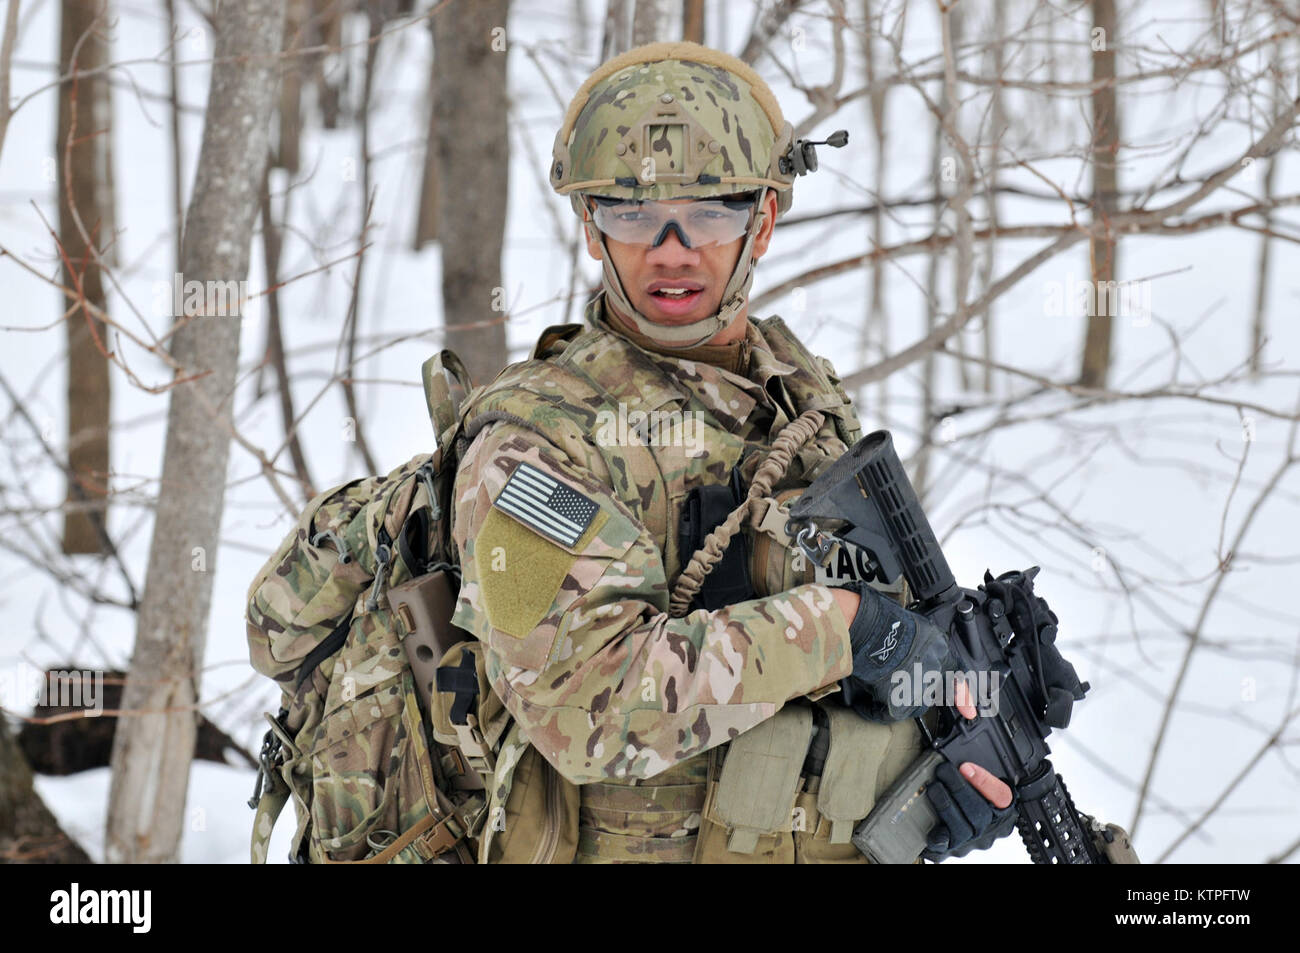 FORT DRUM, NY – Senior Airman Joel Ramirez,a Tactical Air Control Party (TACP) Airman, moves towards the objective training area during an exercise at Fort Drum, NY on March 14, 2015. 30 Airmen from the New York Air National Guard’s 274th Air Support Operations Squadron (ASOS), based at Hancock Field Air National Guard Base trained on Close Air Support (CAS) as well as training for the first time with two CH-47F Chinook helicopters from Company B, 3rd Battalion, 126th Aviation based in Rochester, NY. The 274th mission is to advise US Army commanders on how to best utilize US and NATO assets fo Stock Photo